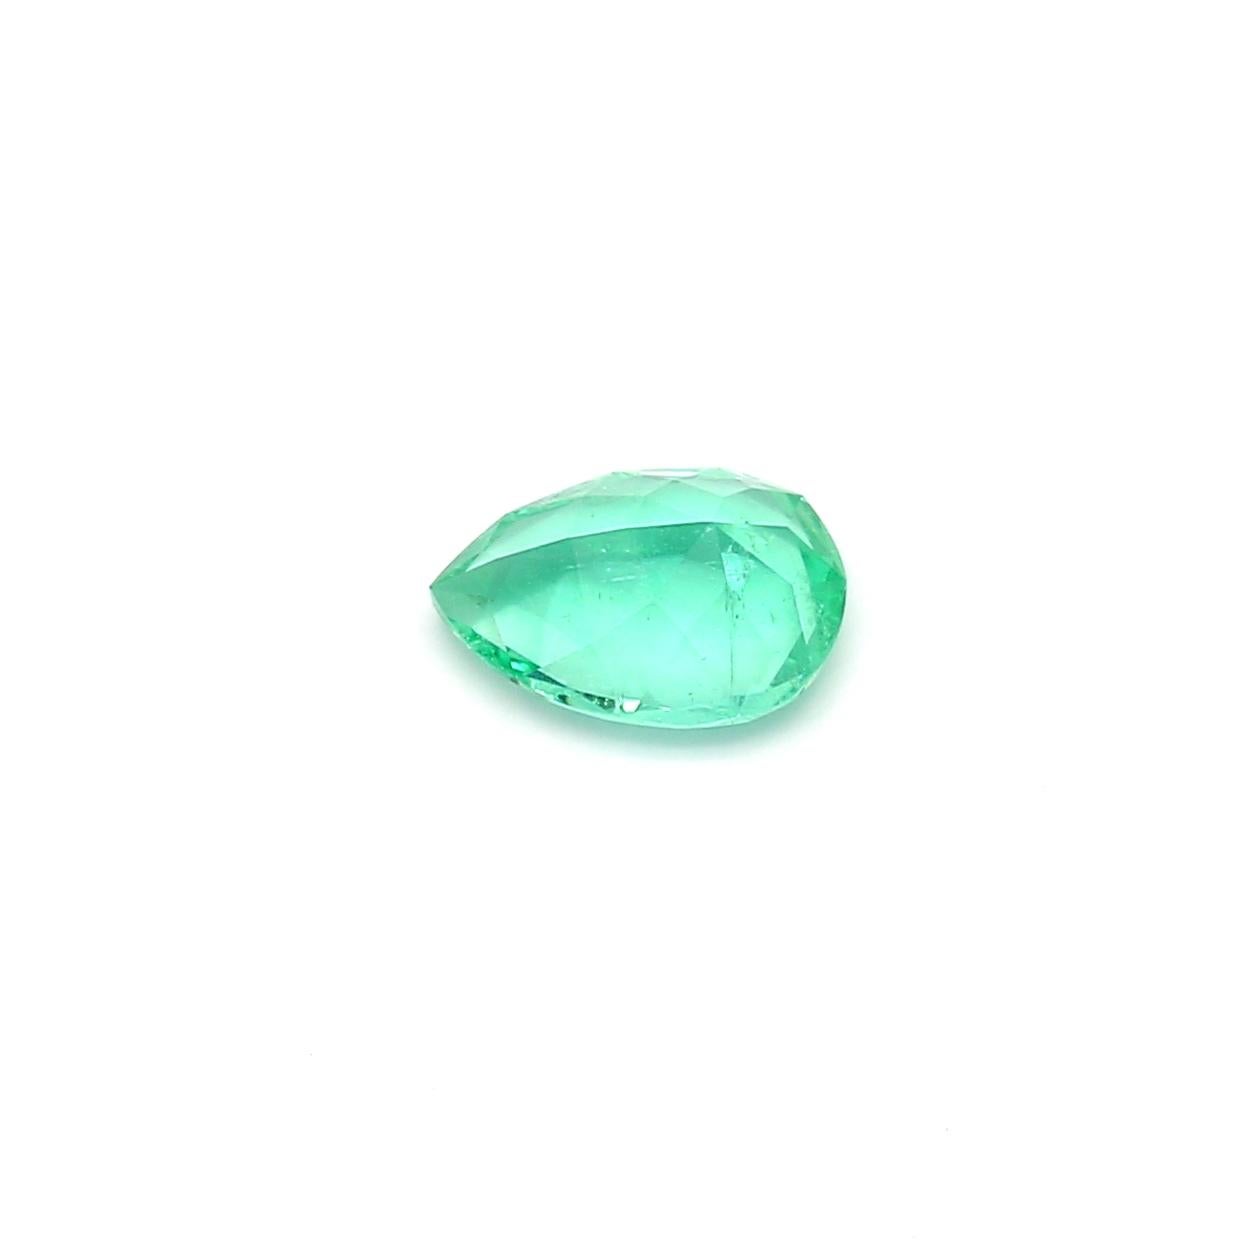 Emerald is a very lively green gemstone. It's highly appreciated over the world and has long been associated with good luck, prosperity and long life. Emeralds with their elongated shape are a good choice for ring or pendant.

Shape - Pear
Weight -